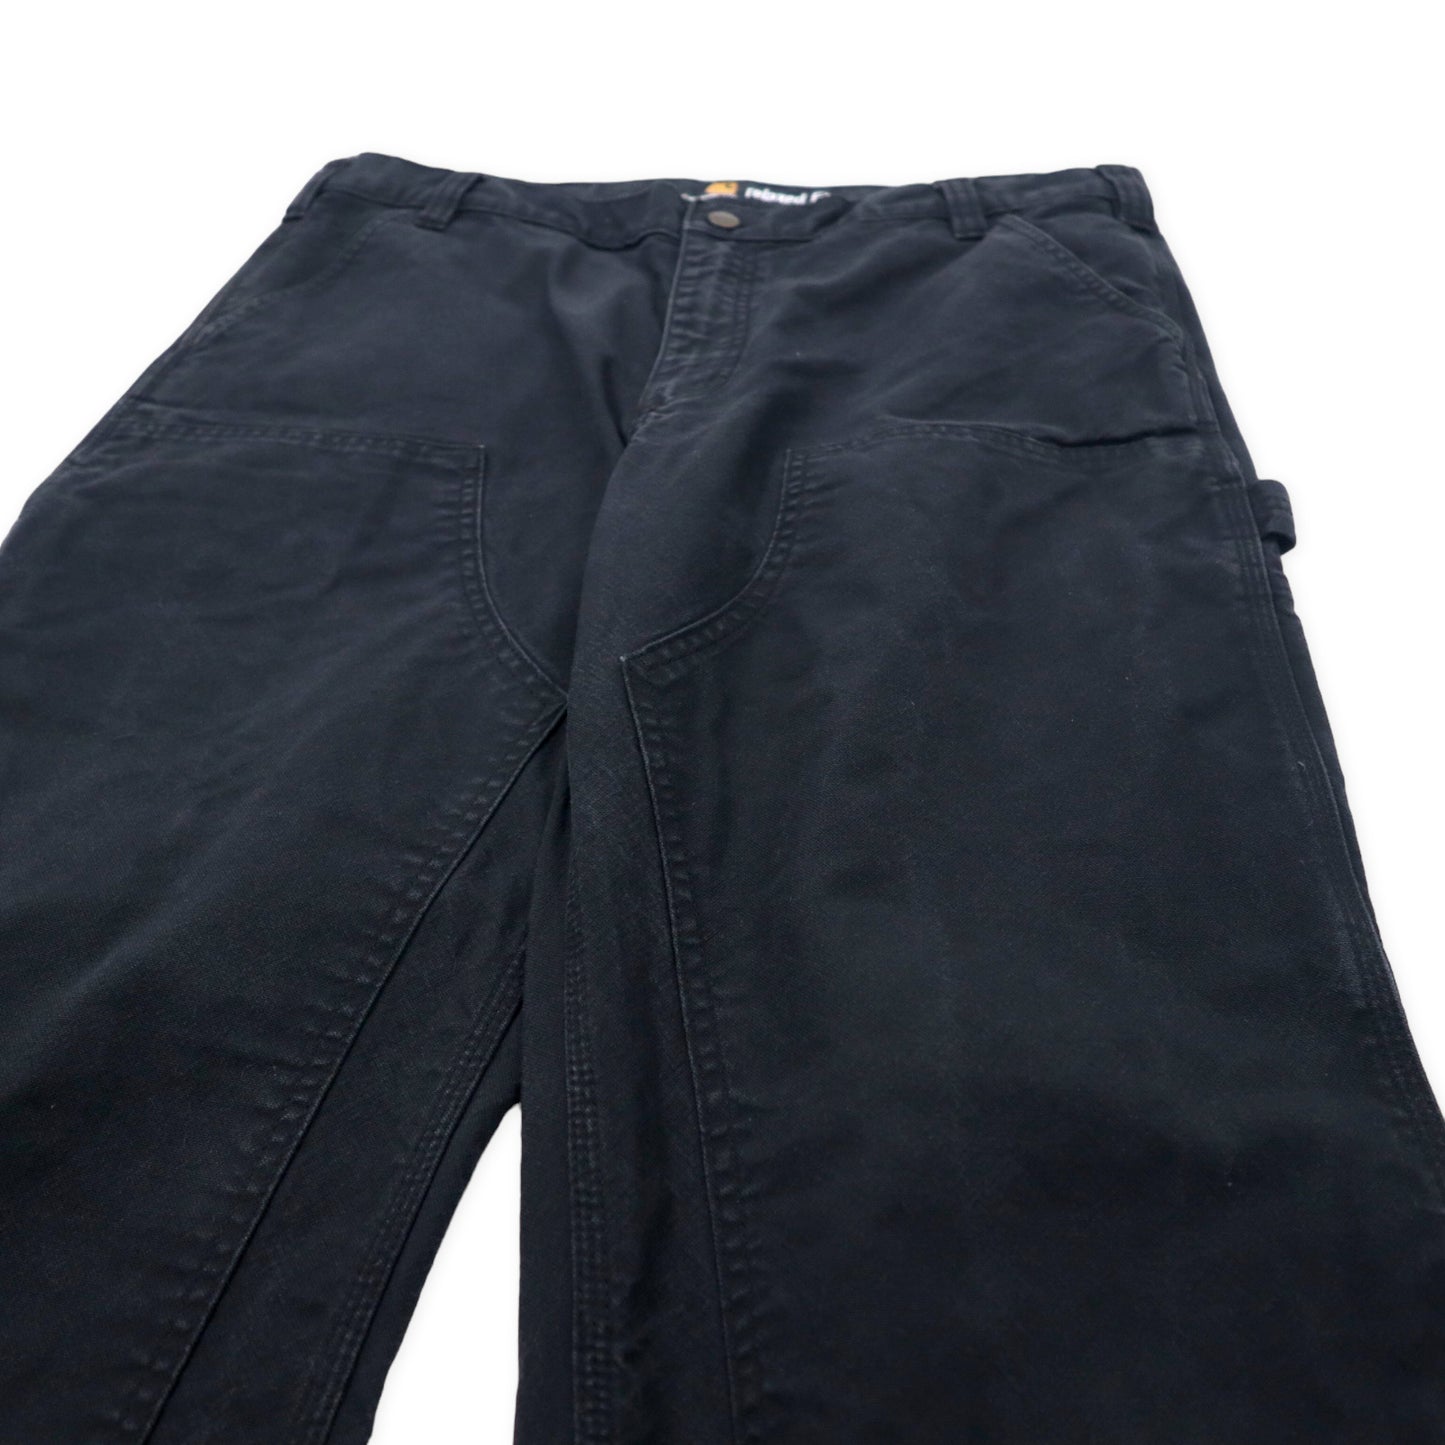 carhartt ダブルニー ダック ペインターパンツ 38 ブラック コットン relaxed fit 103334BK RUGGED FLEX RELAXED FIT DOUBLE FRONT PANT